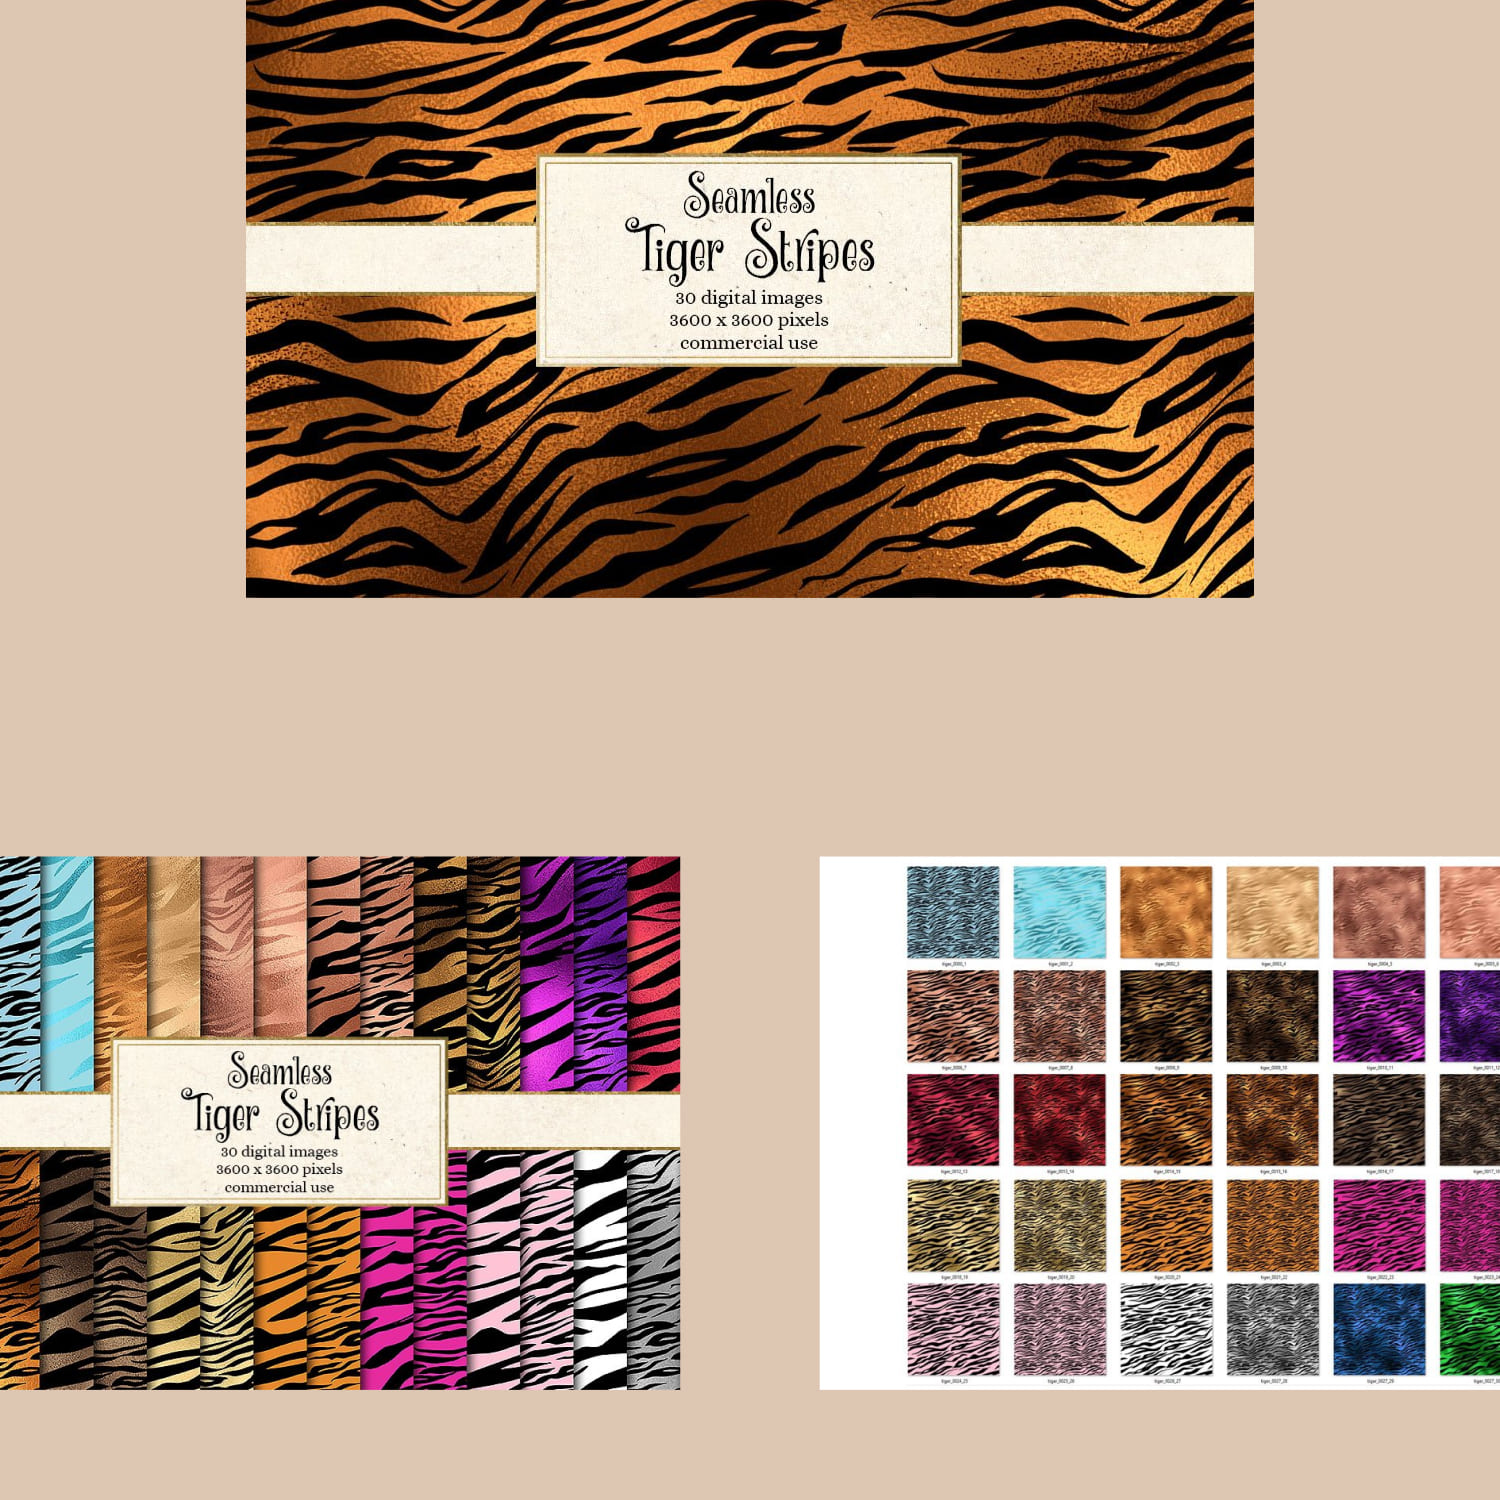 Tiger Stripes Seamless Patterns cover.